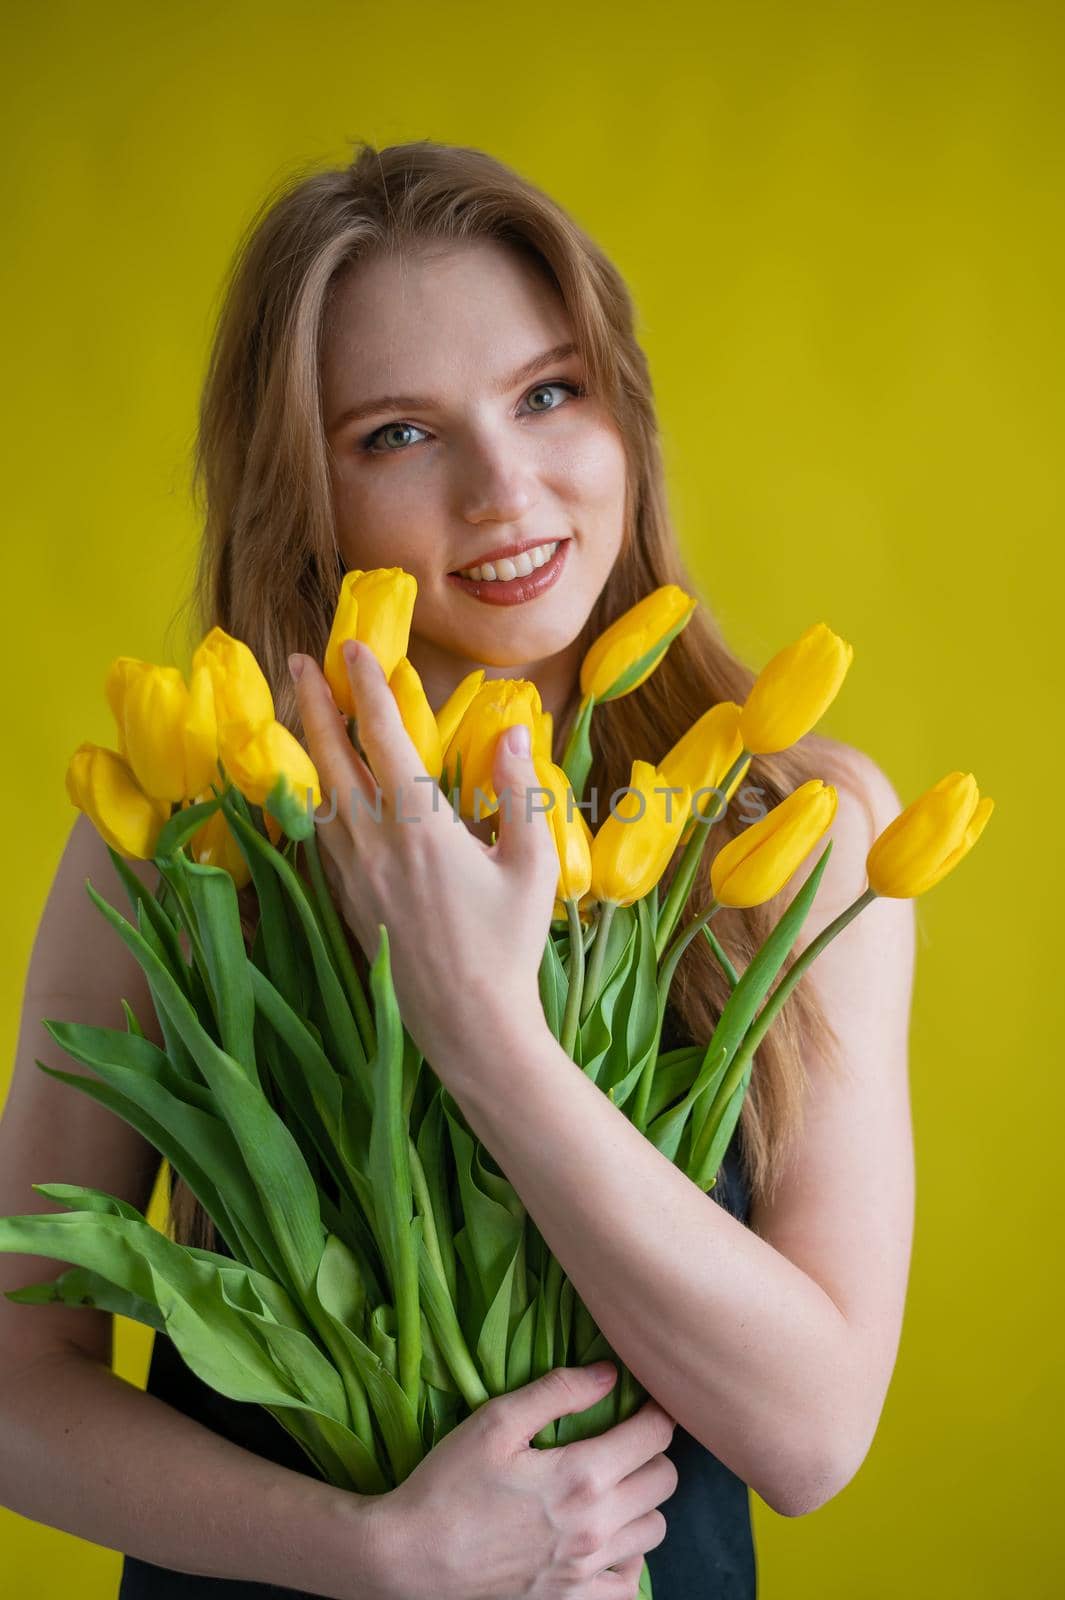 Caucasian woman with an armful of yellow tulips on a yellow background. International Women's Day. Bouquet of spring flowers by mrwed54